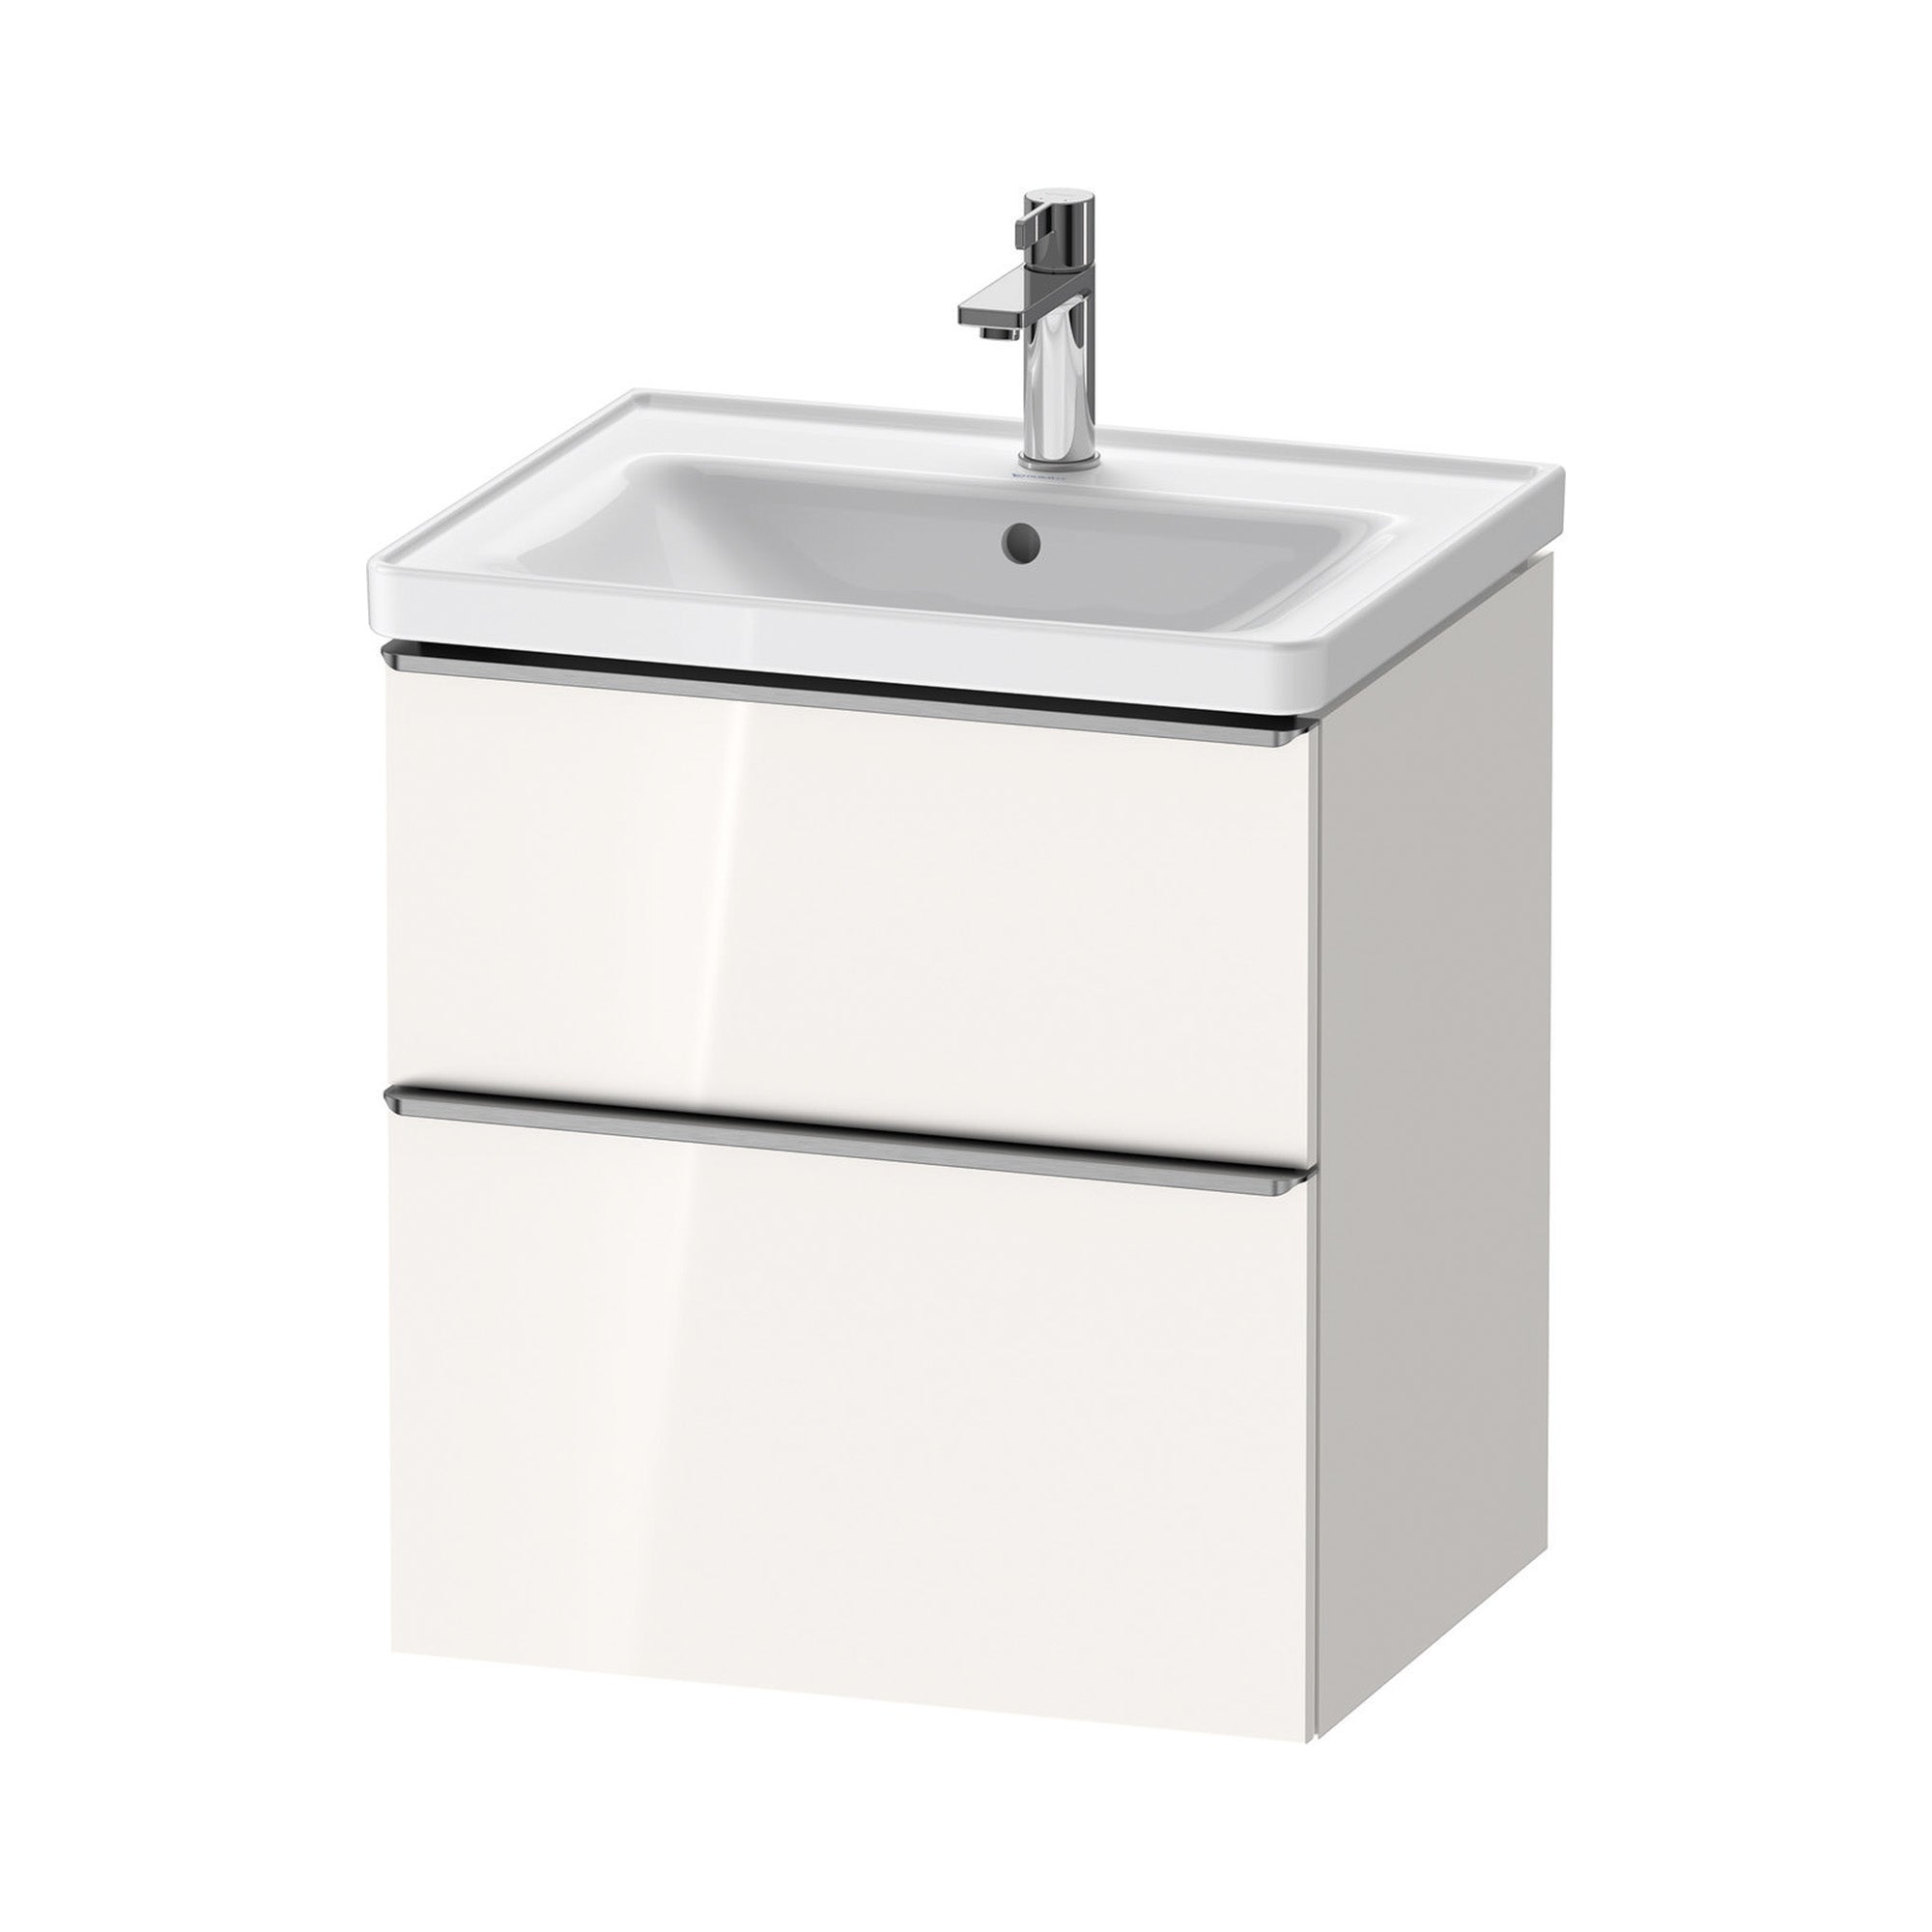 duravit d-neo 600 wall mounted vanity unit with d-neo basin gloss white stainless steel handles